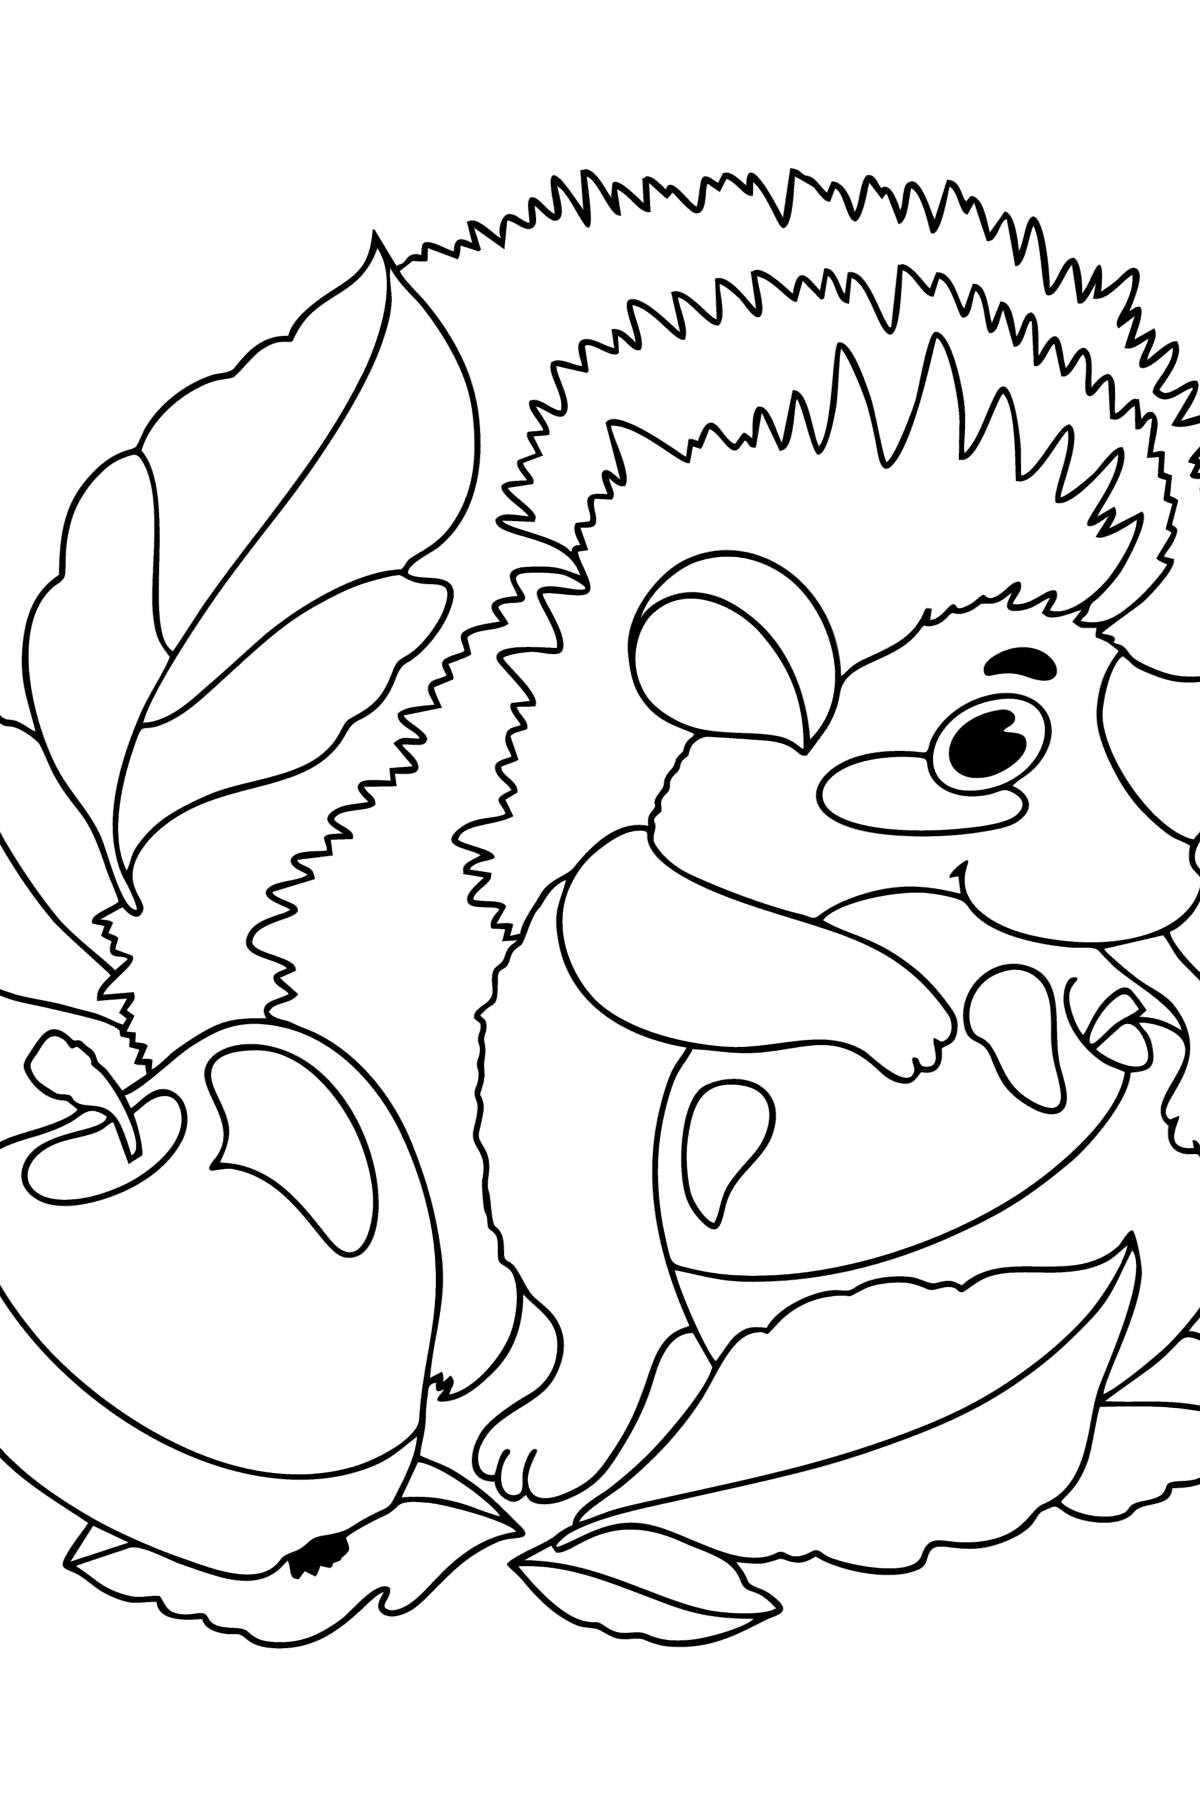 Apple and hedgehog сolouring page - Coloring Pages for Kids